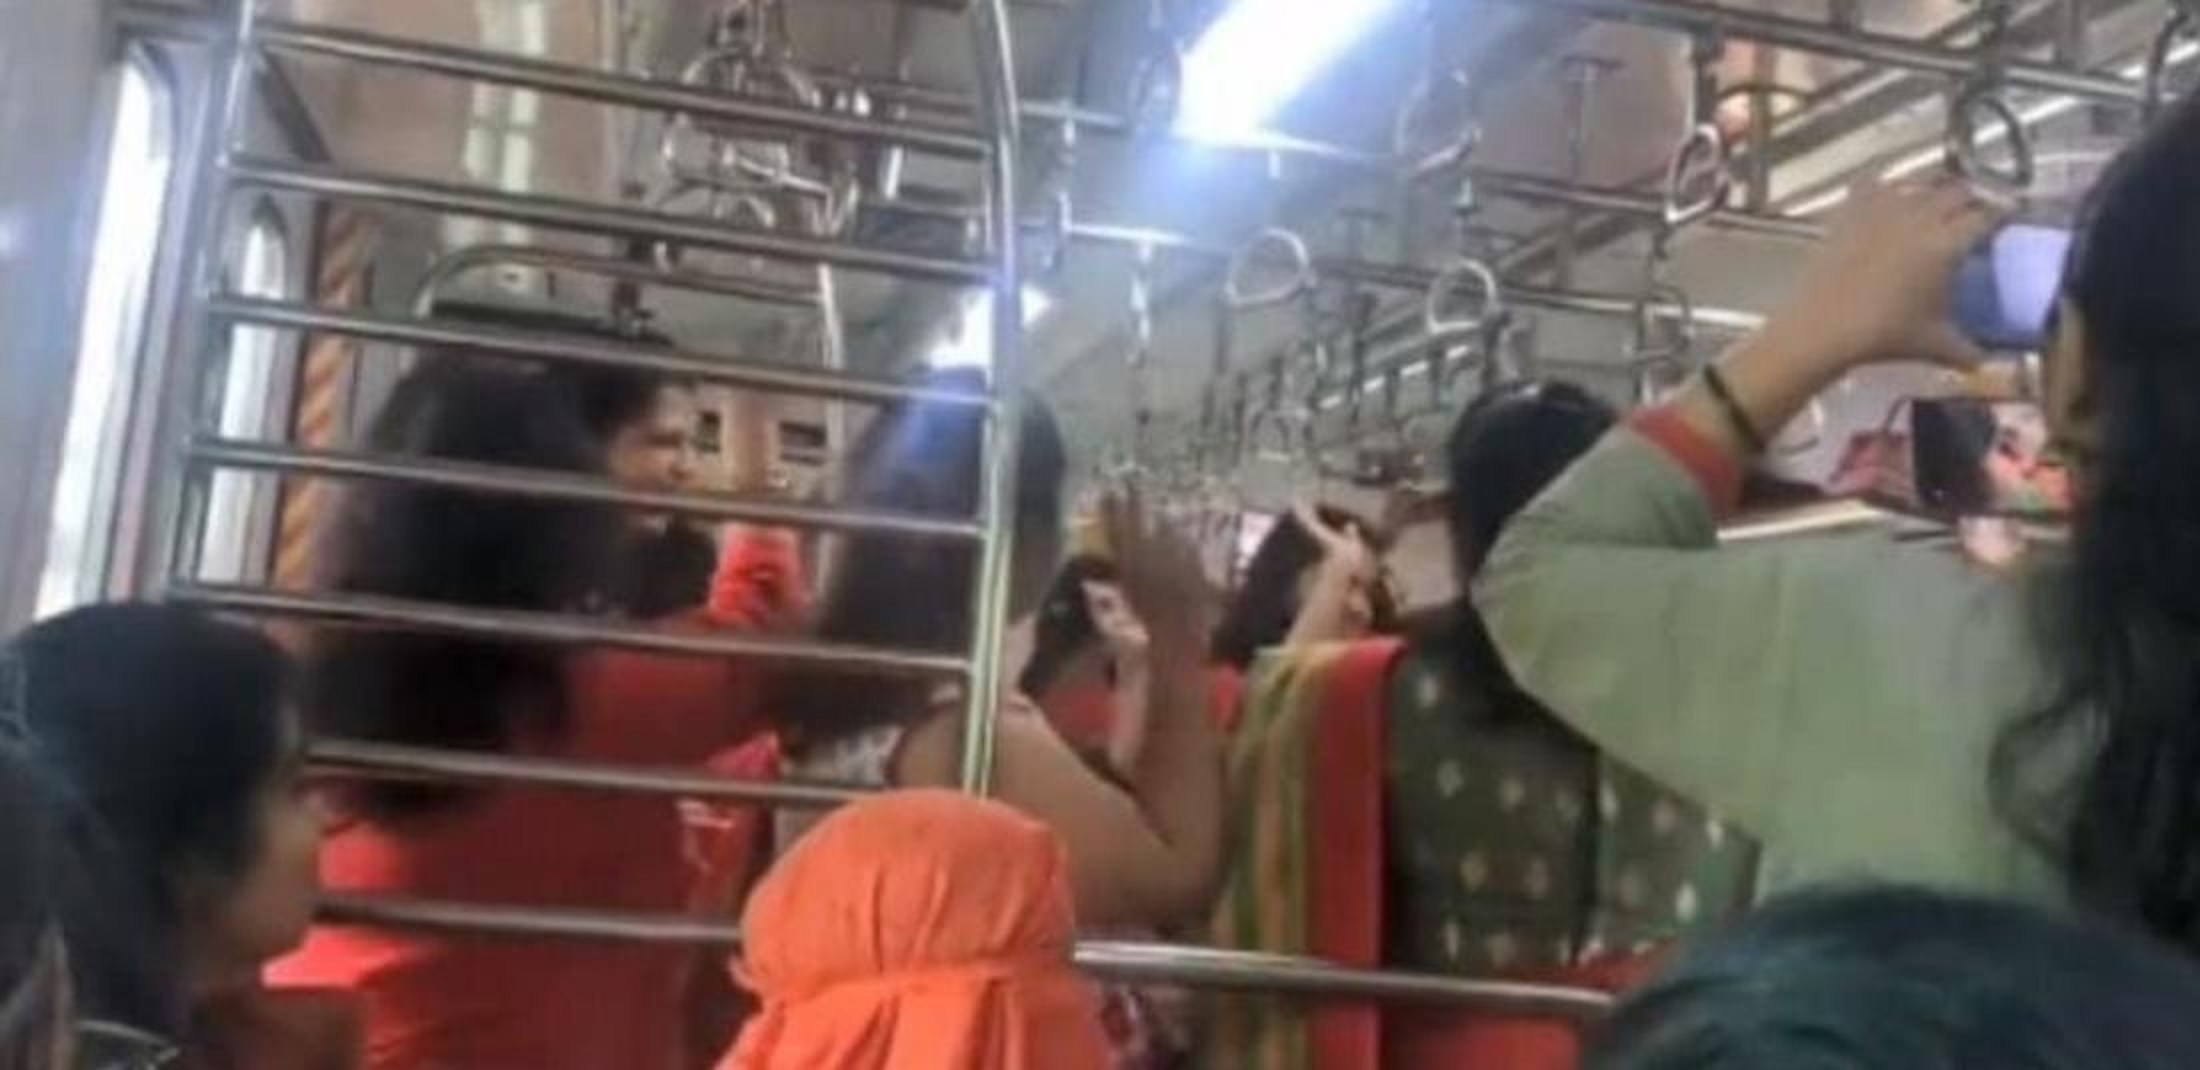 Watch : Women in mumbai local train perform garba together, video goes viral on the internet